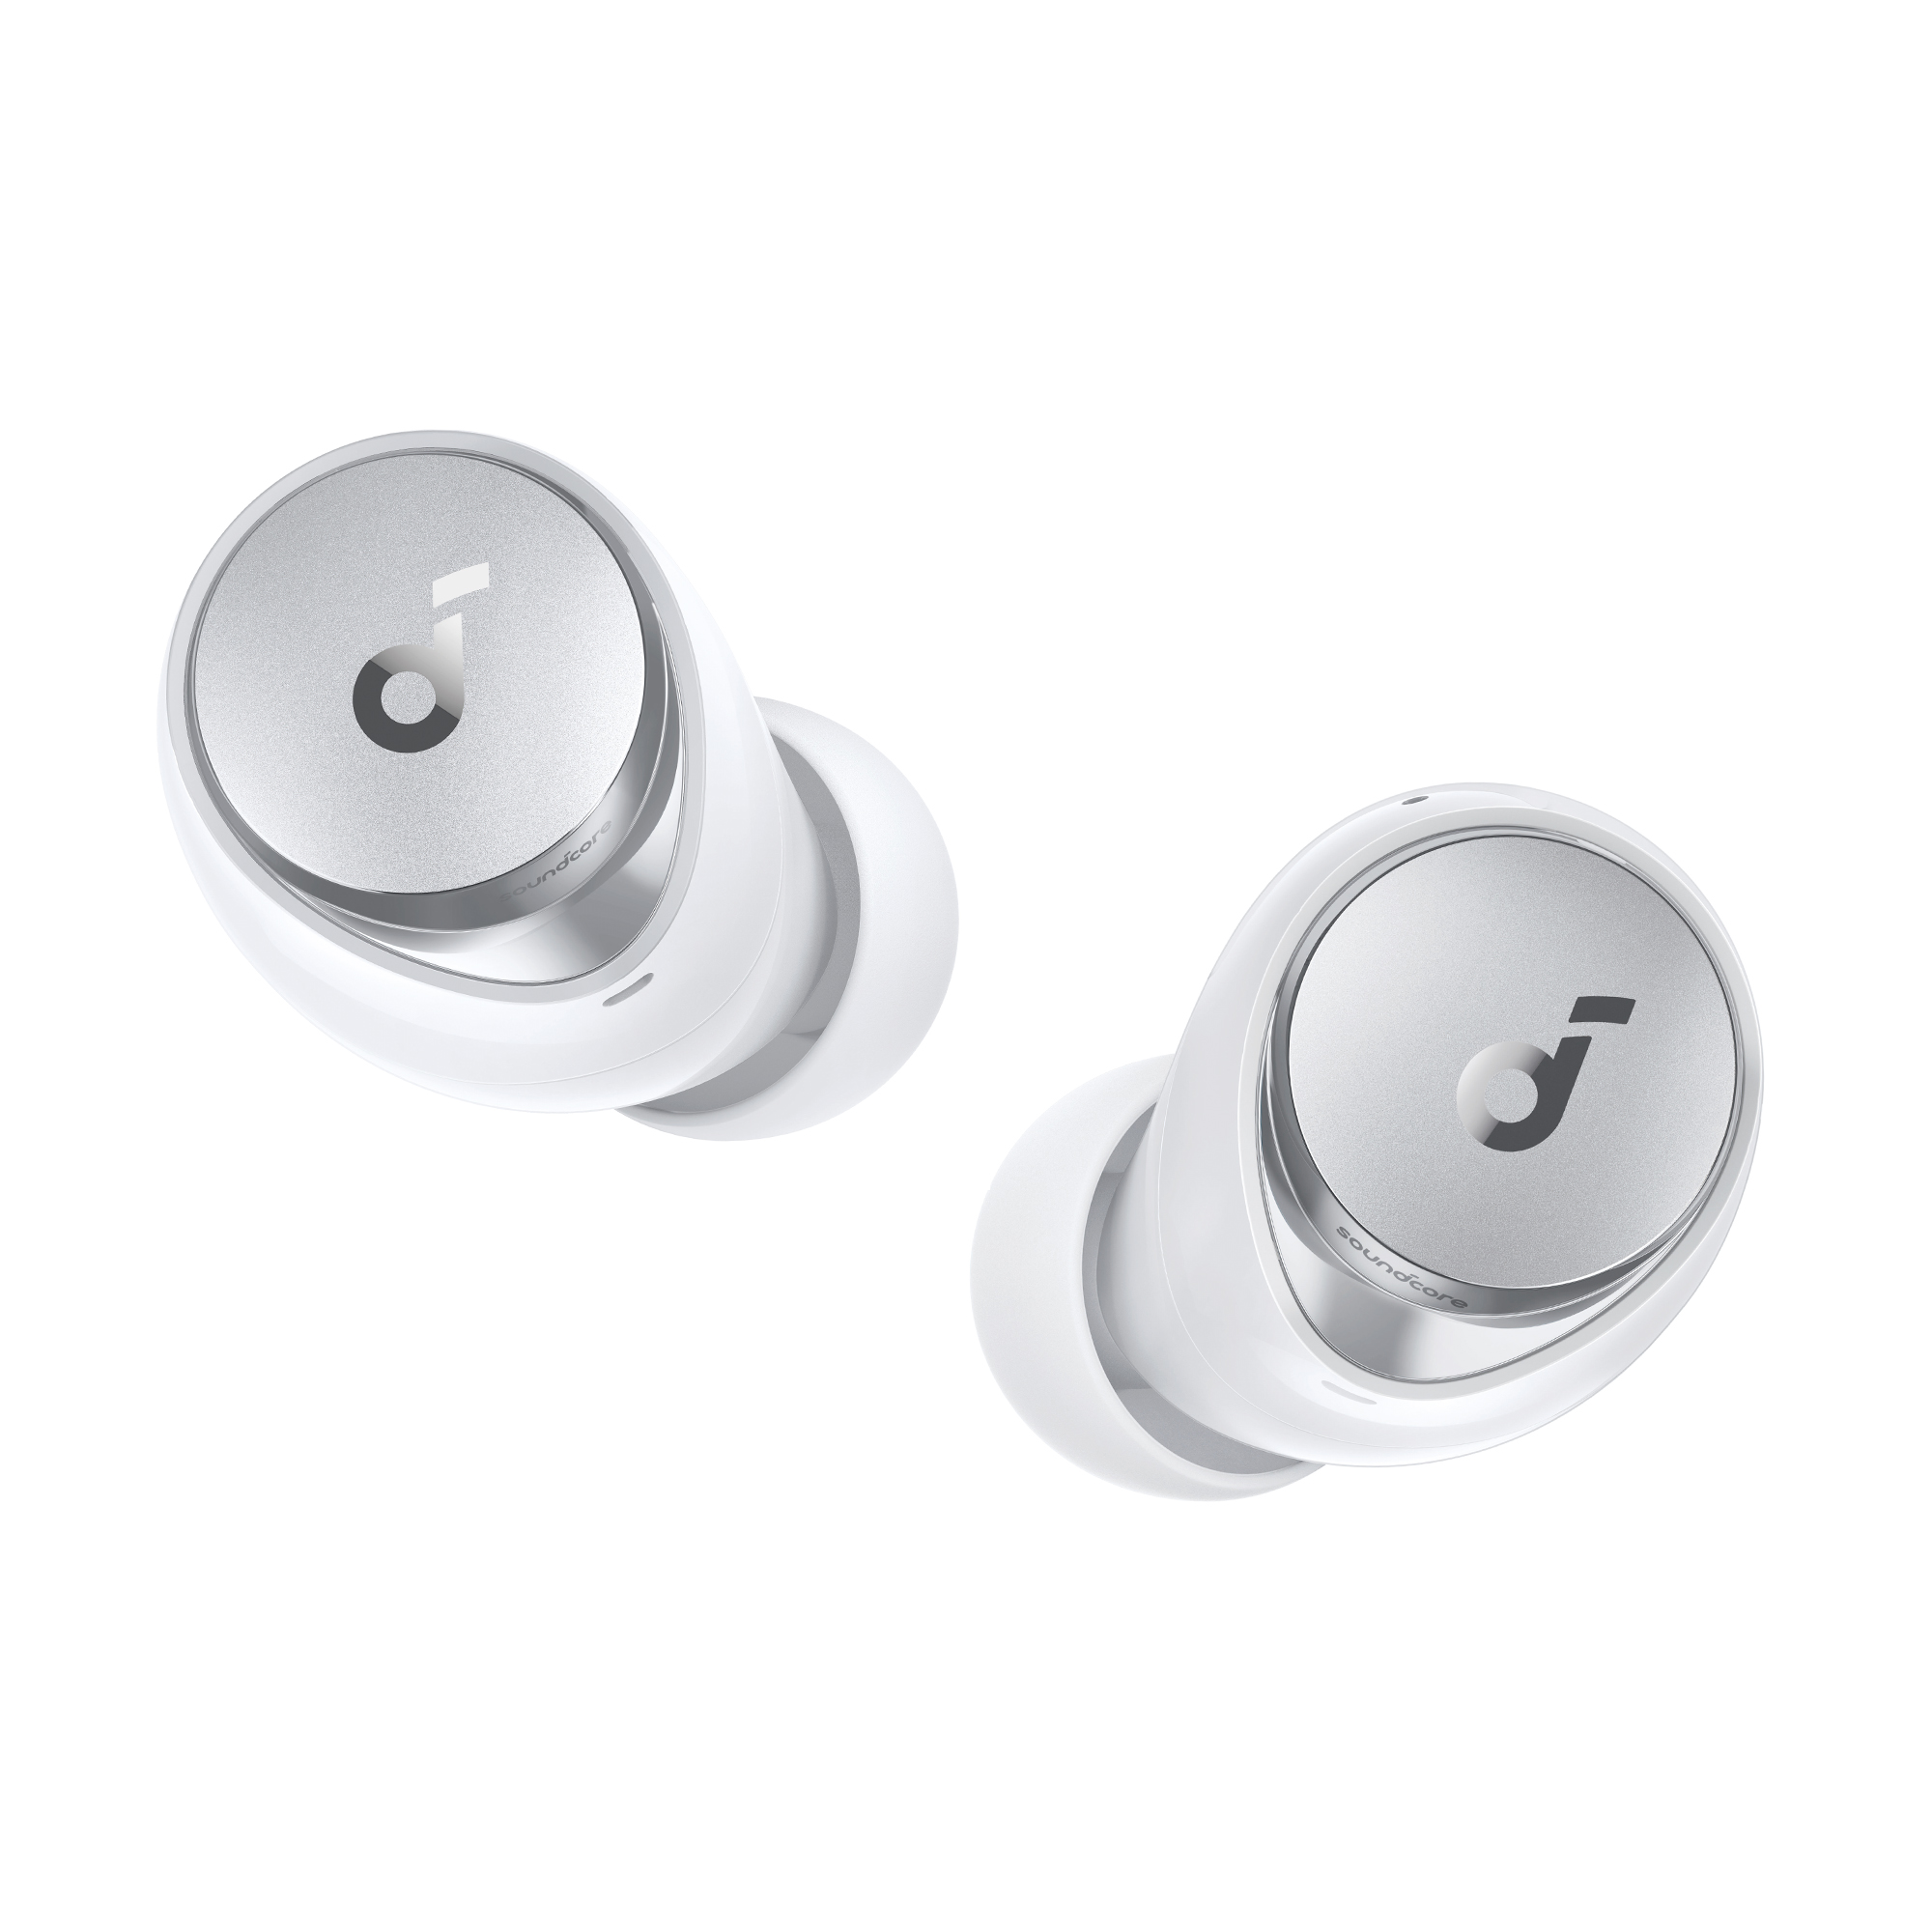 Soundcore A40 Wireless Earbuds - White